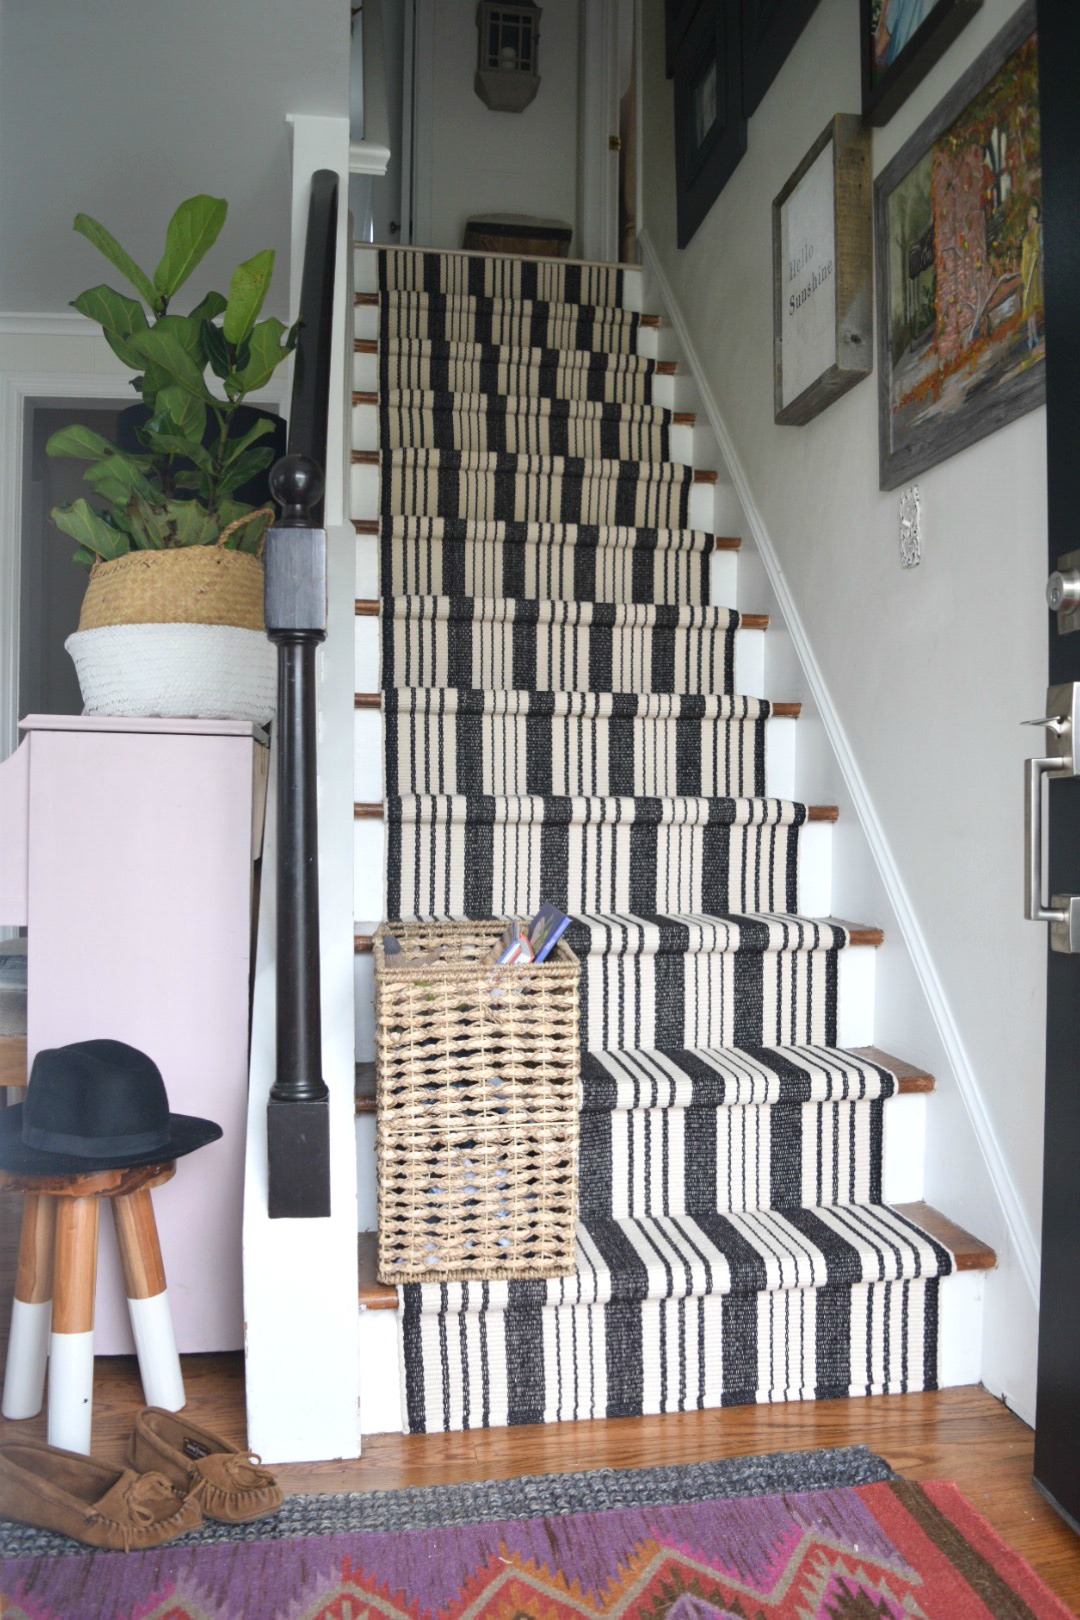 Everything I Learned About Stair Carpet Runners And What We Ended